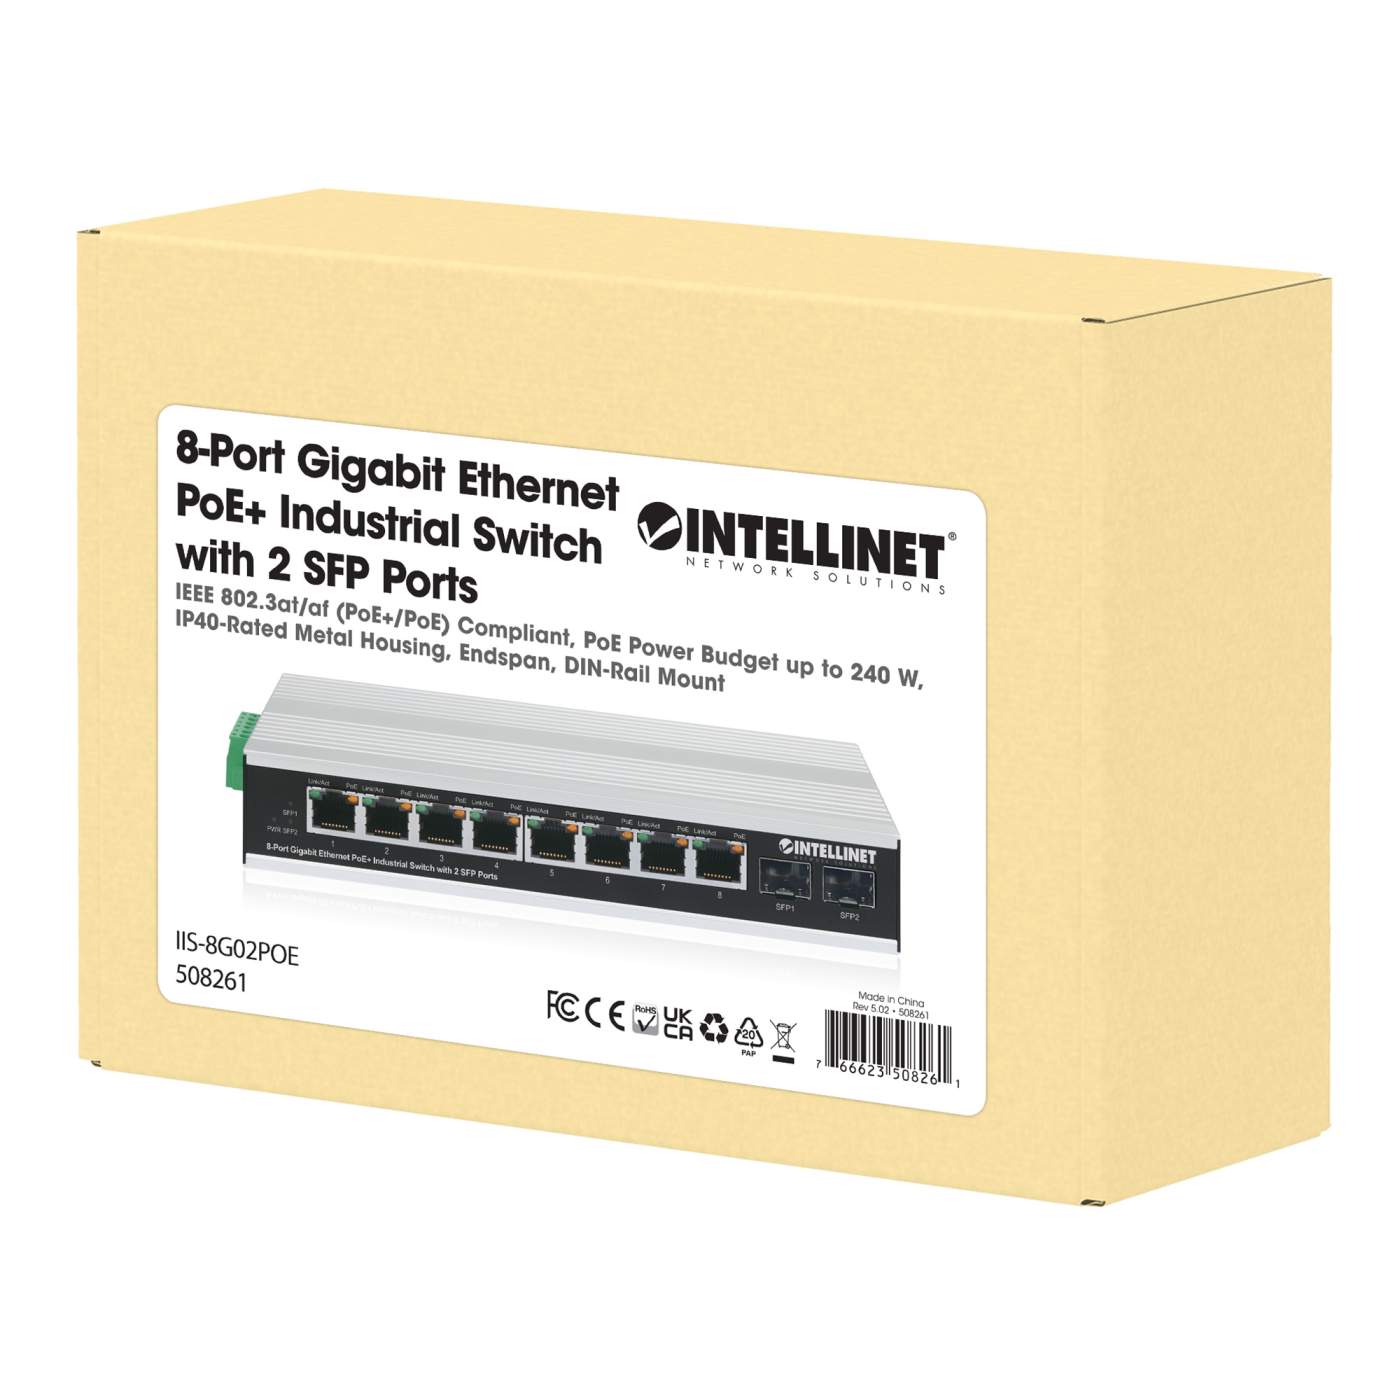 Industrial 8-Port Gigabit Ethernet PoE+ Switch with 2 SFP Ports Packaging Image 2